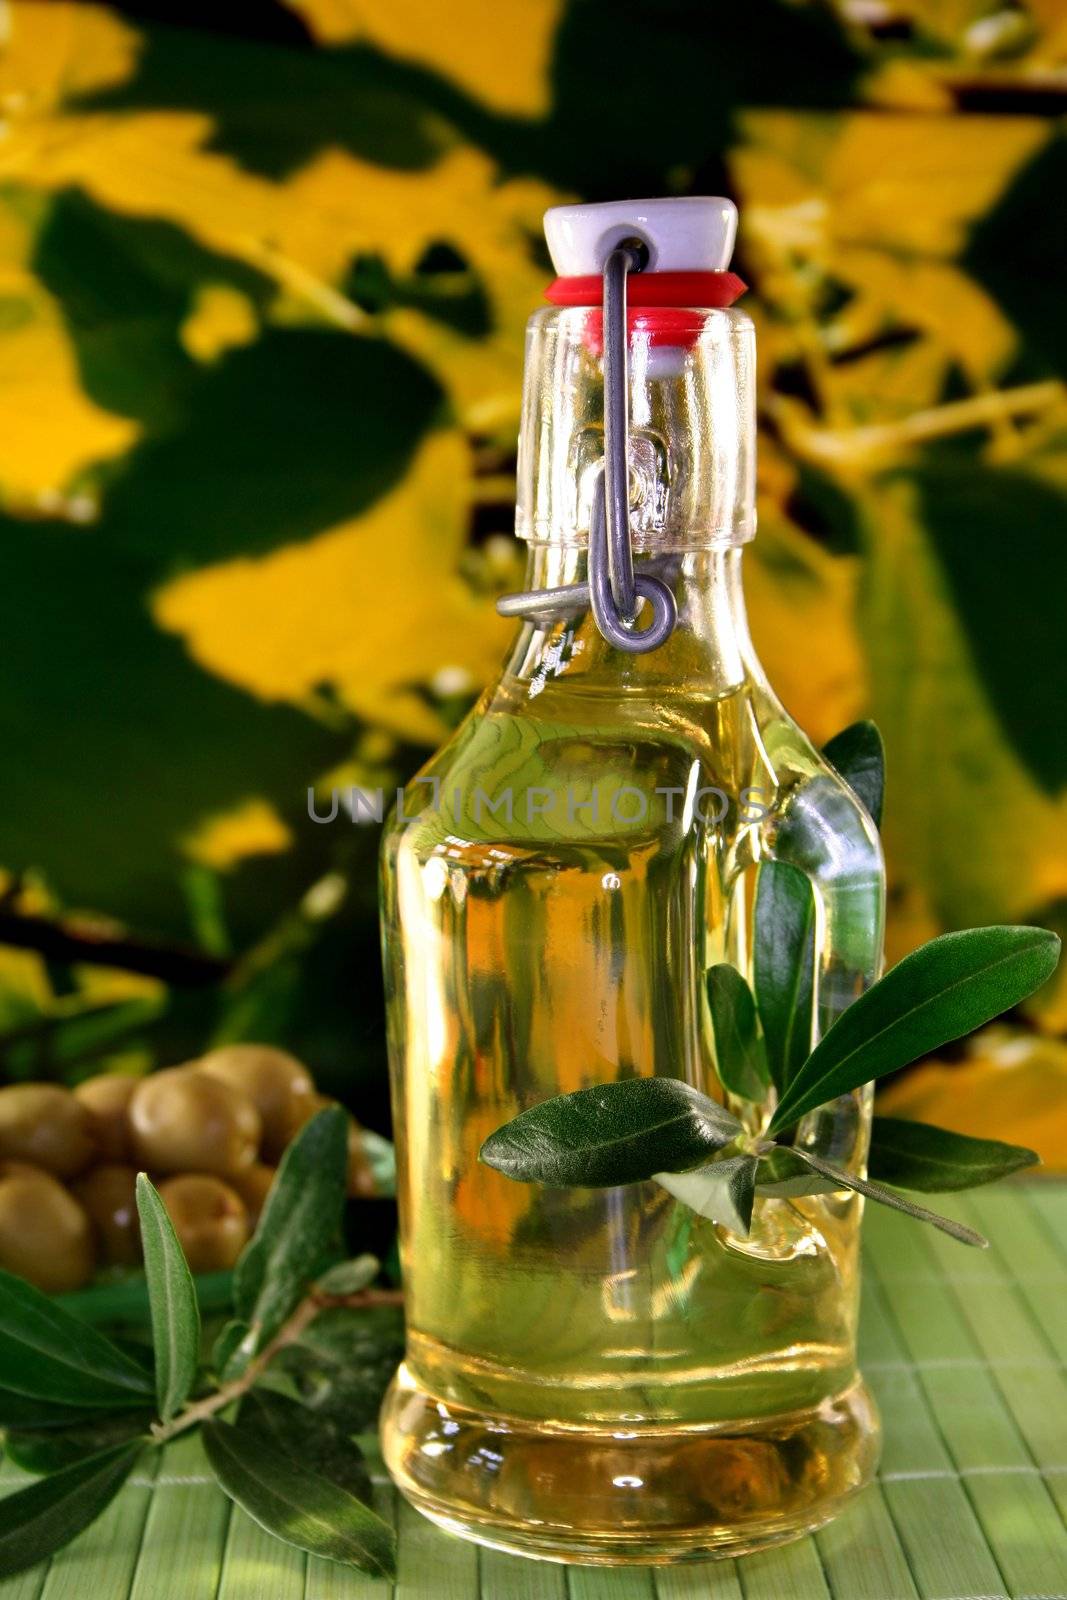 Olive oil with olive branch and fresh ingredients